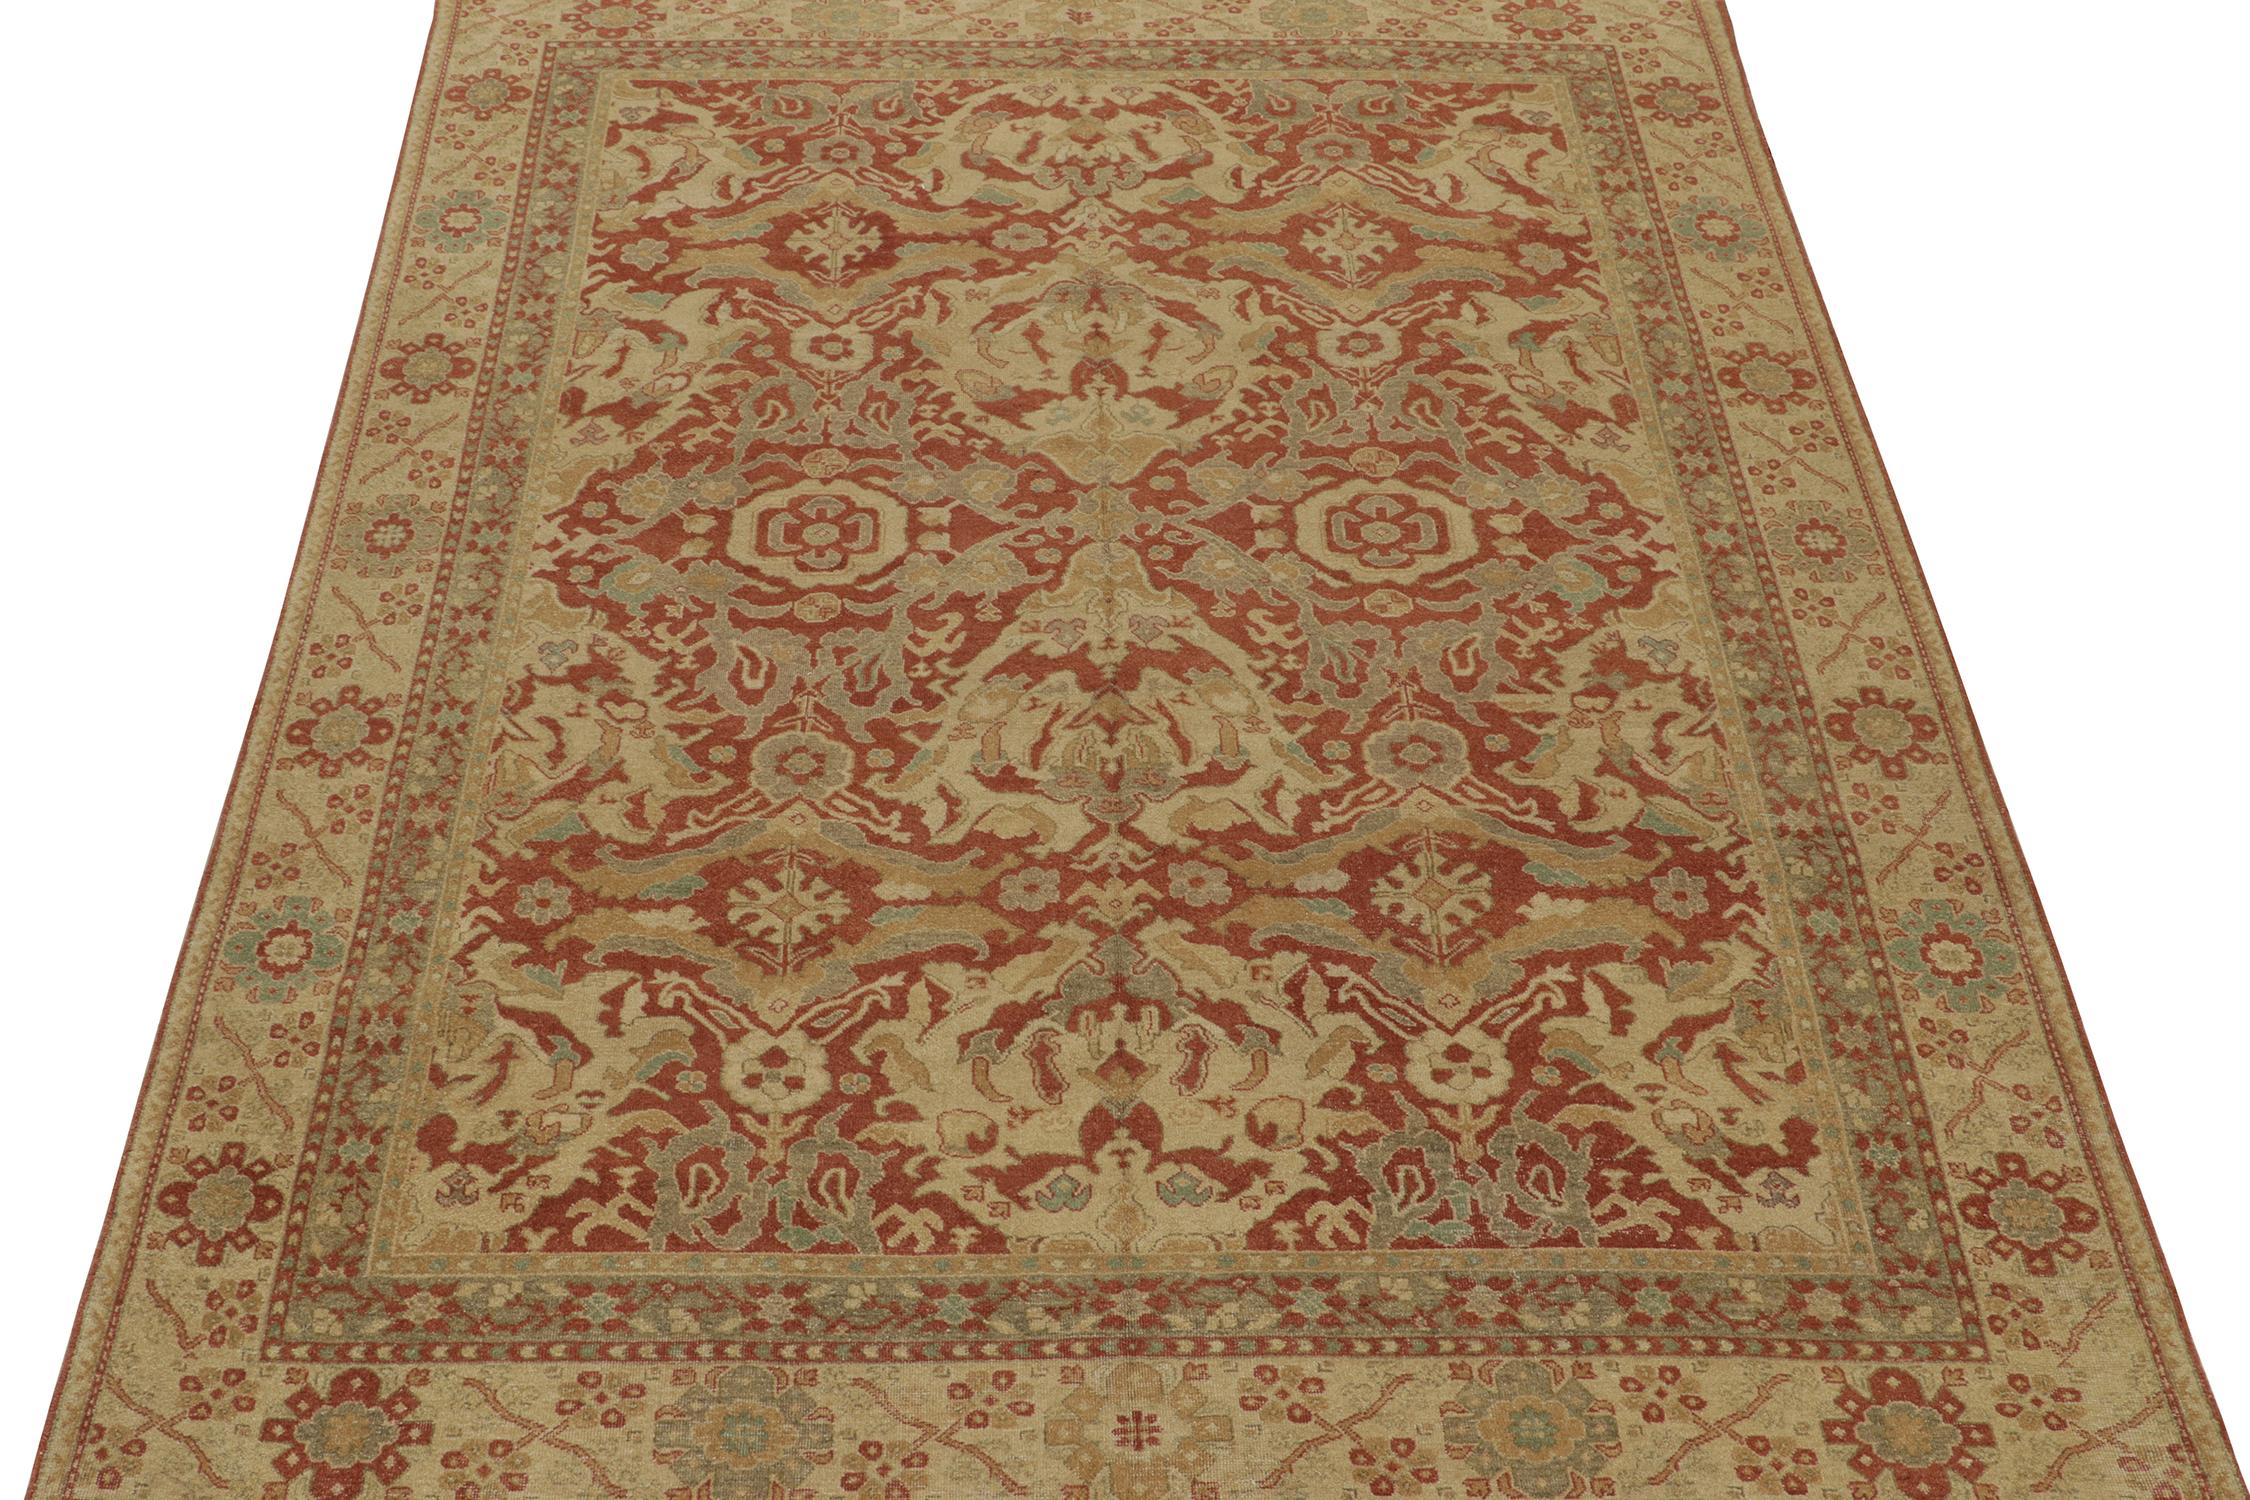 Indian Rug & Kilim’s Oushak style Rug in Red, Beige and Gray-Blue Floral Pattern For Sale